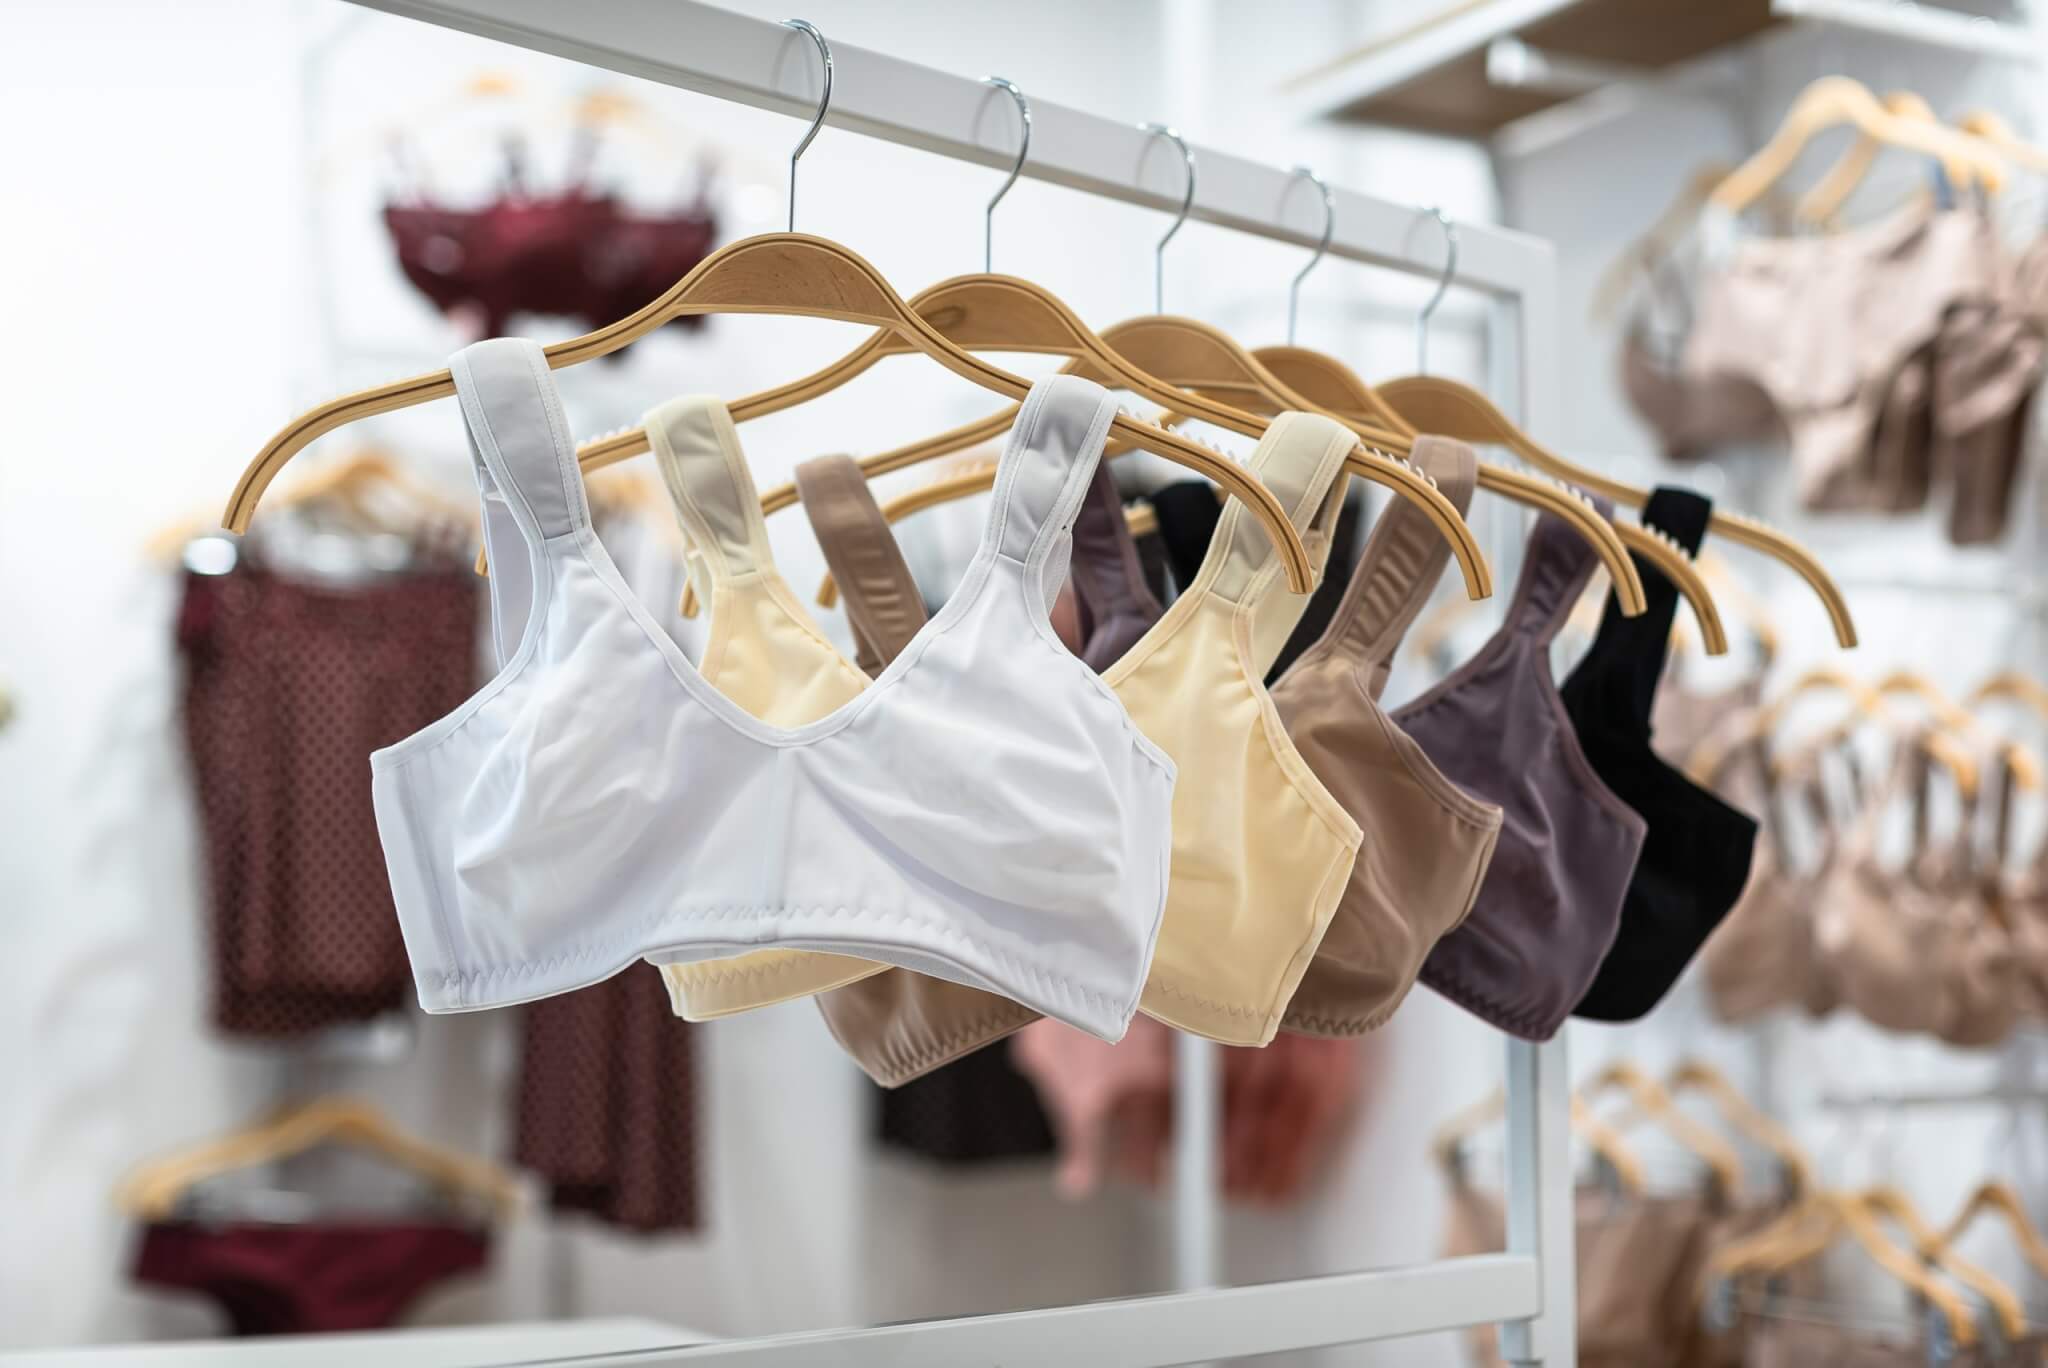 Struggling to find the right bra? Experts share tips for finding the  perfect garments with lift and support